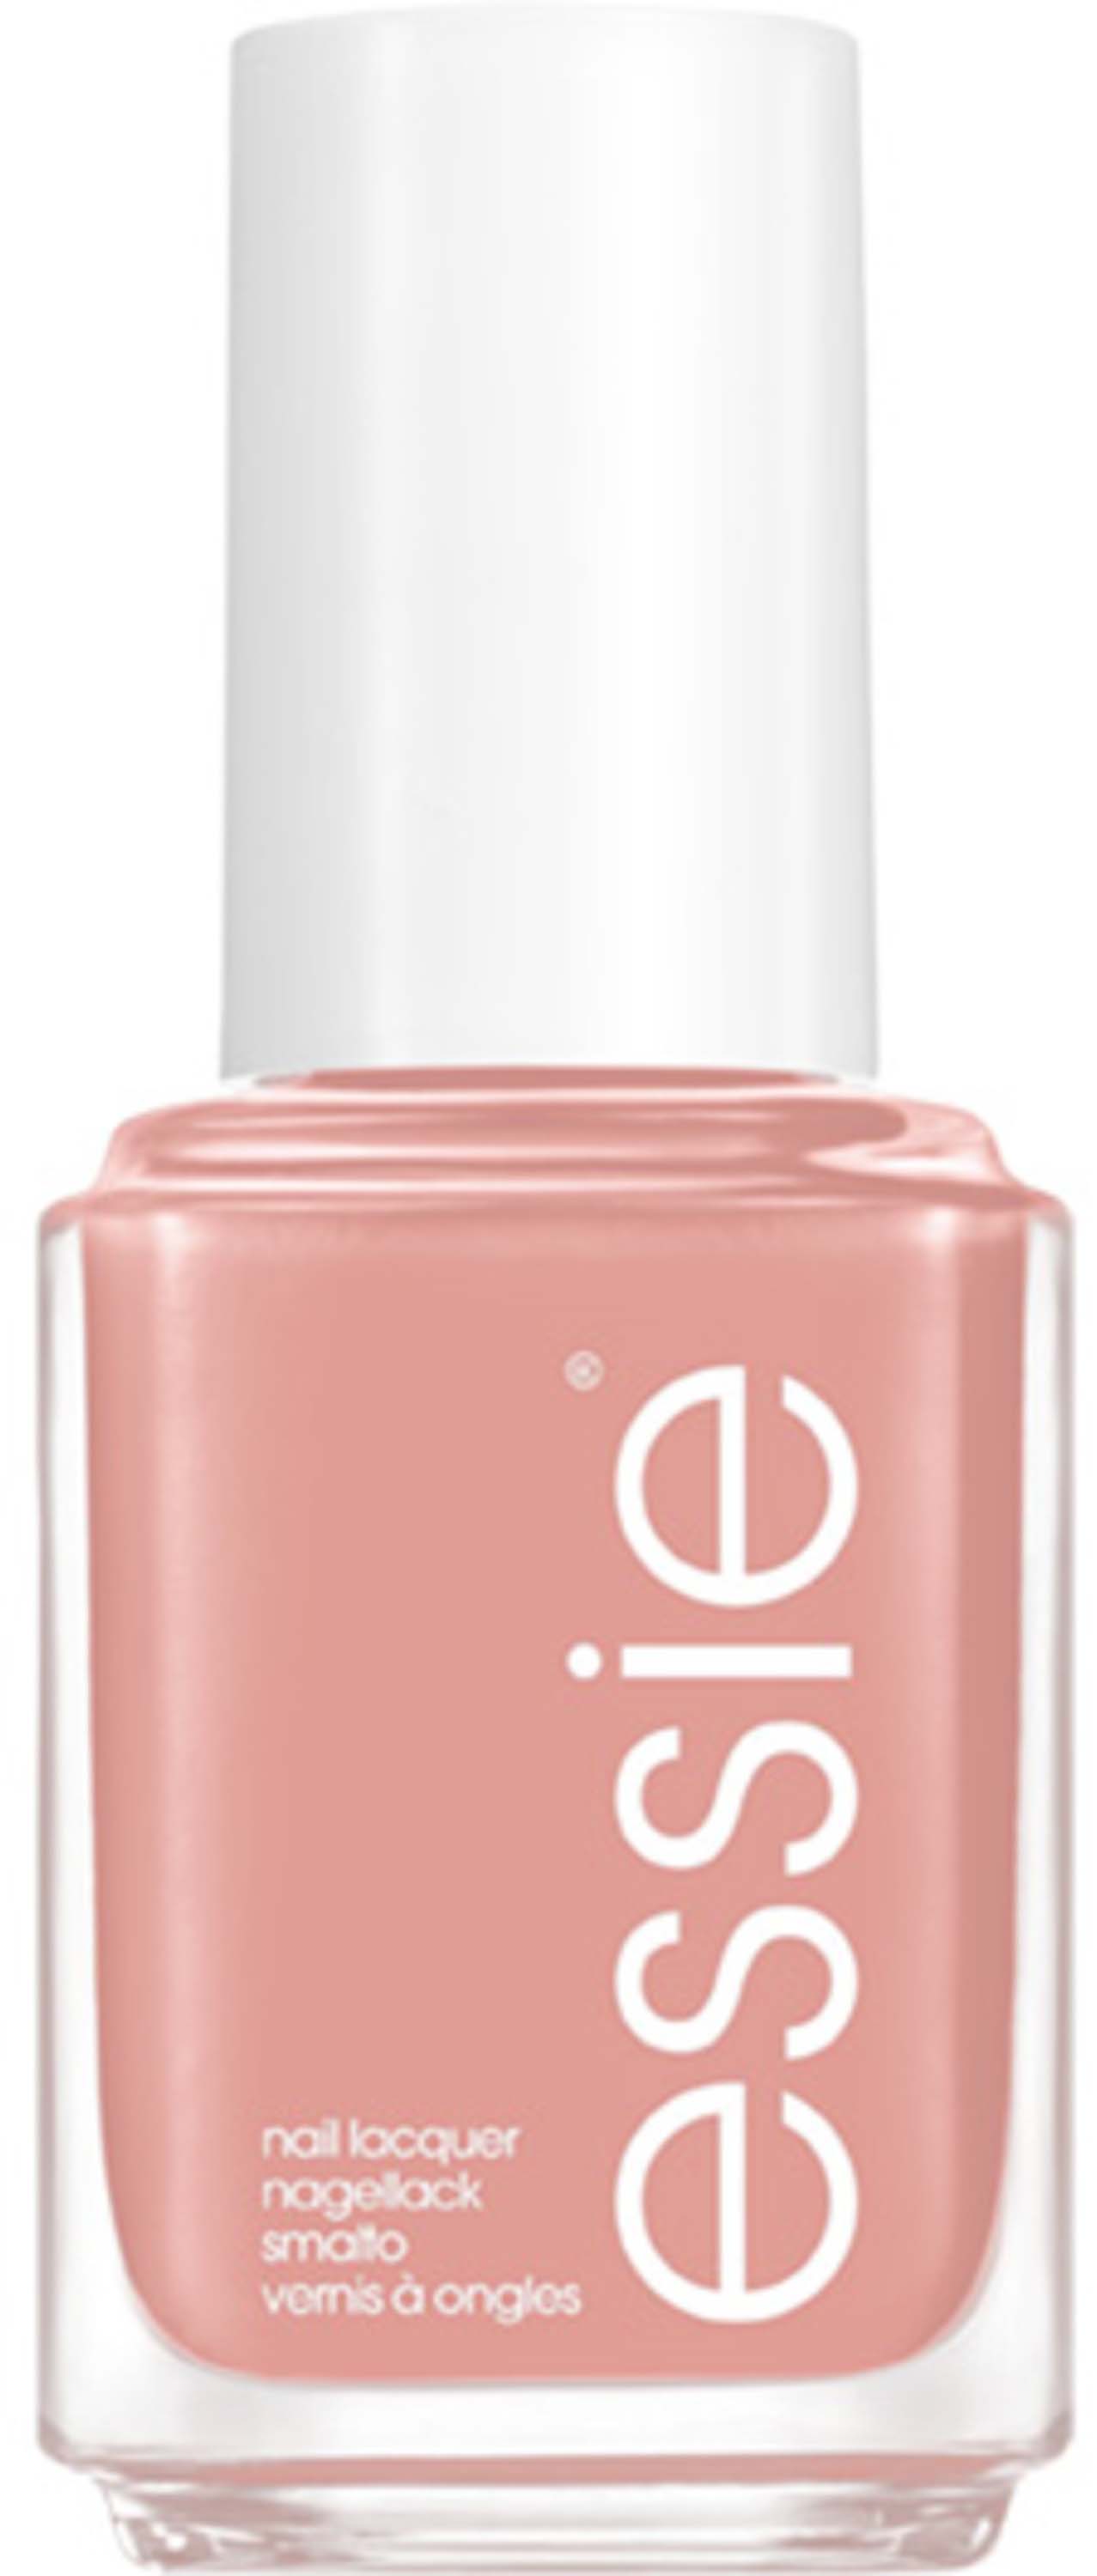 Essie not red-y Is Real 749 The collection for Snuggle Lacquer bed Nail